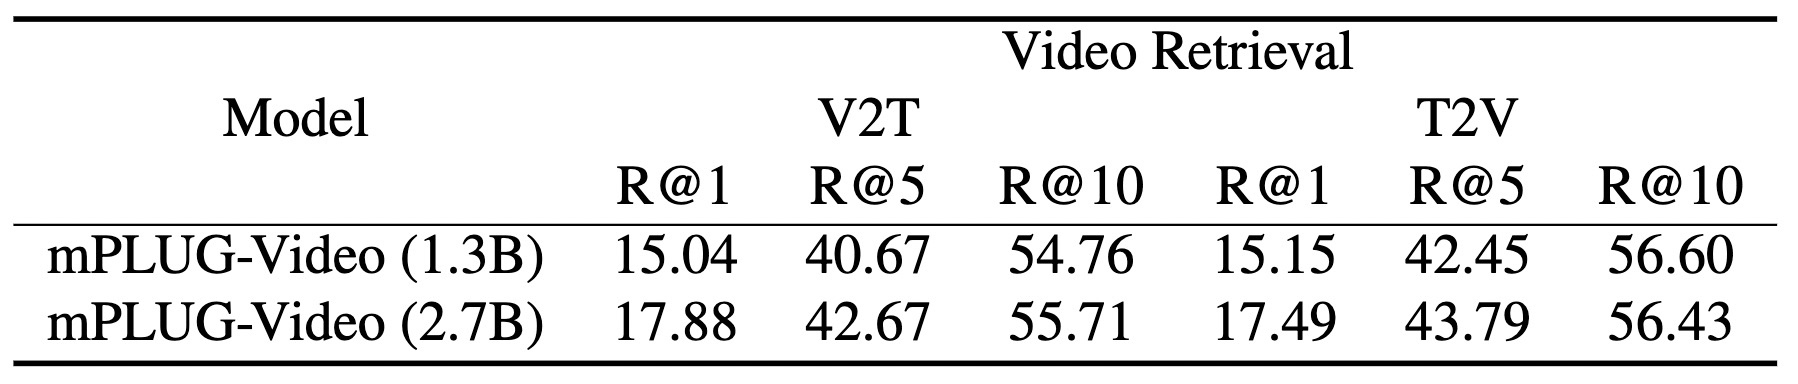 Video retrieval results on the validation set.